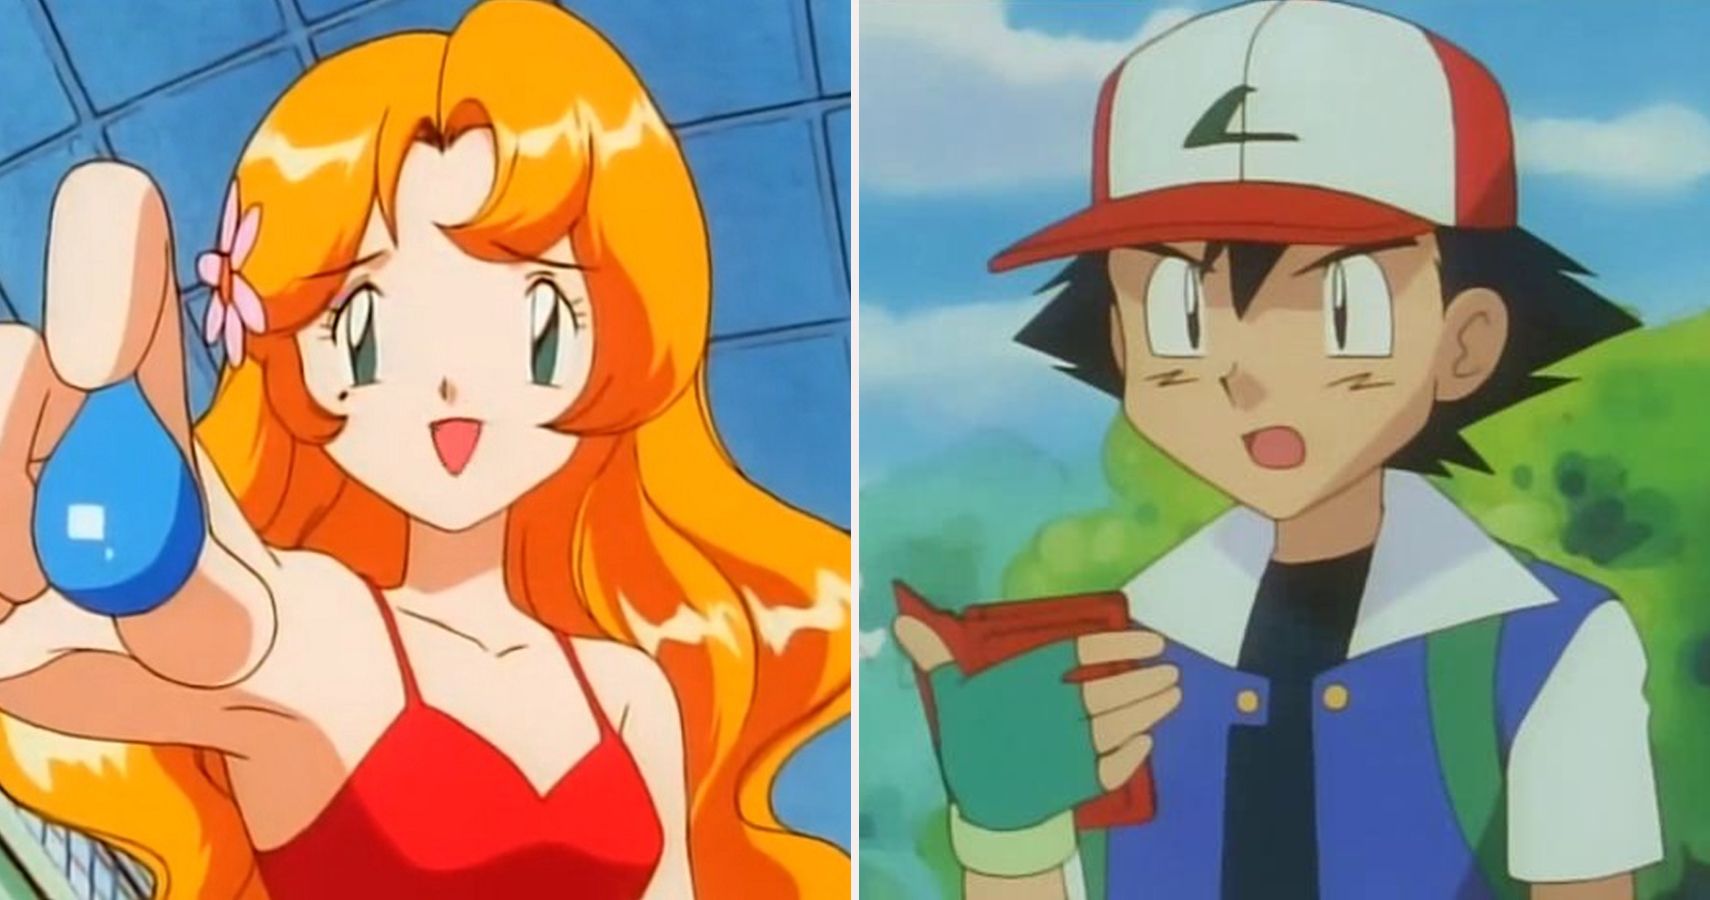 Goodbye to my childhood': Ash Ketchum leaves Pokémon anime after over 20  years